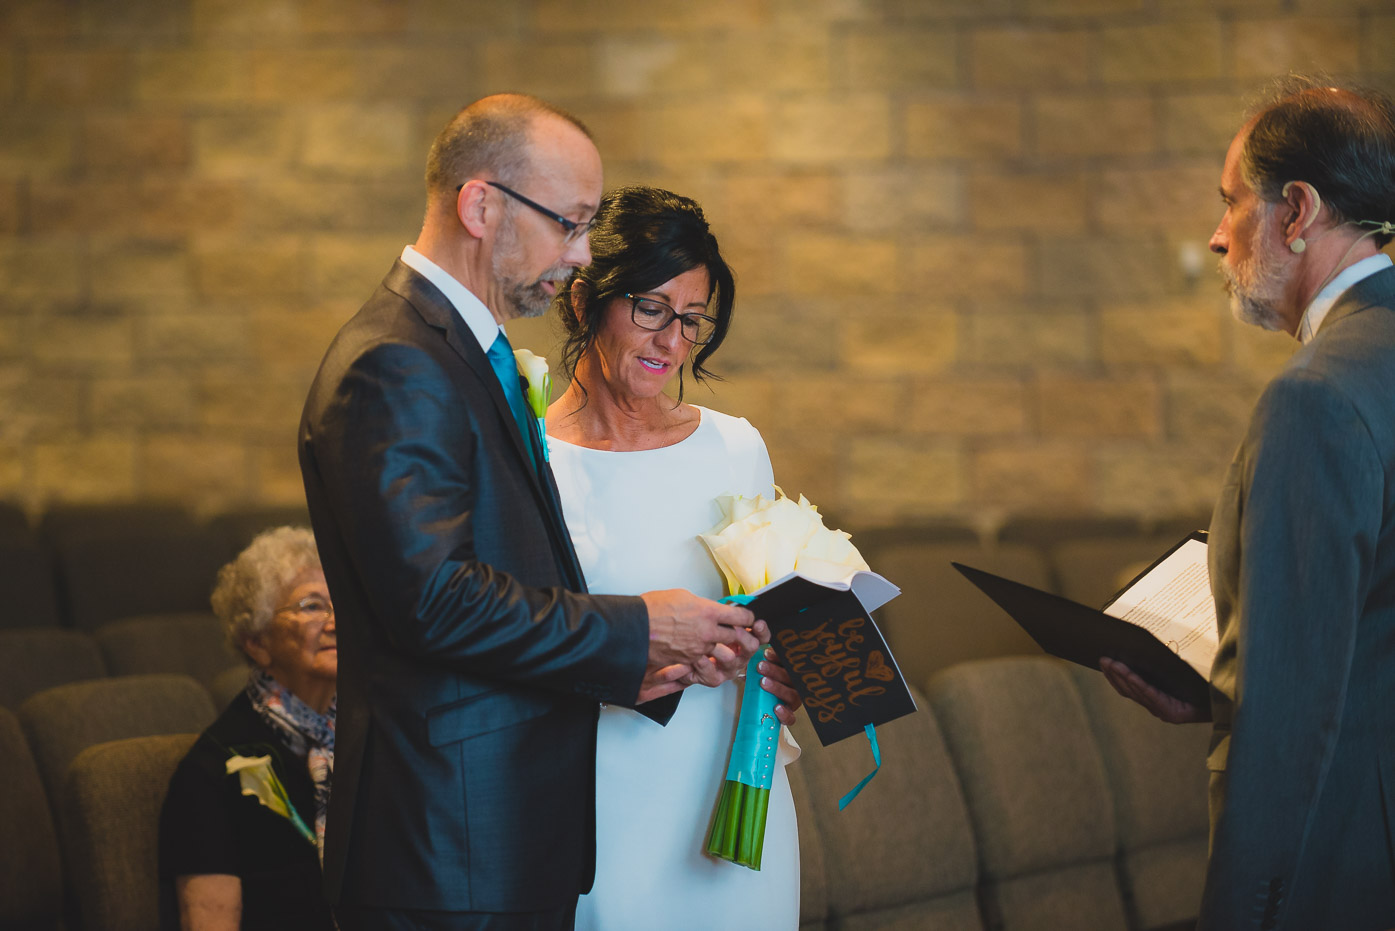 Reading Vows Together